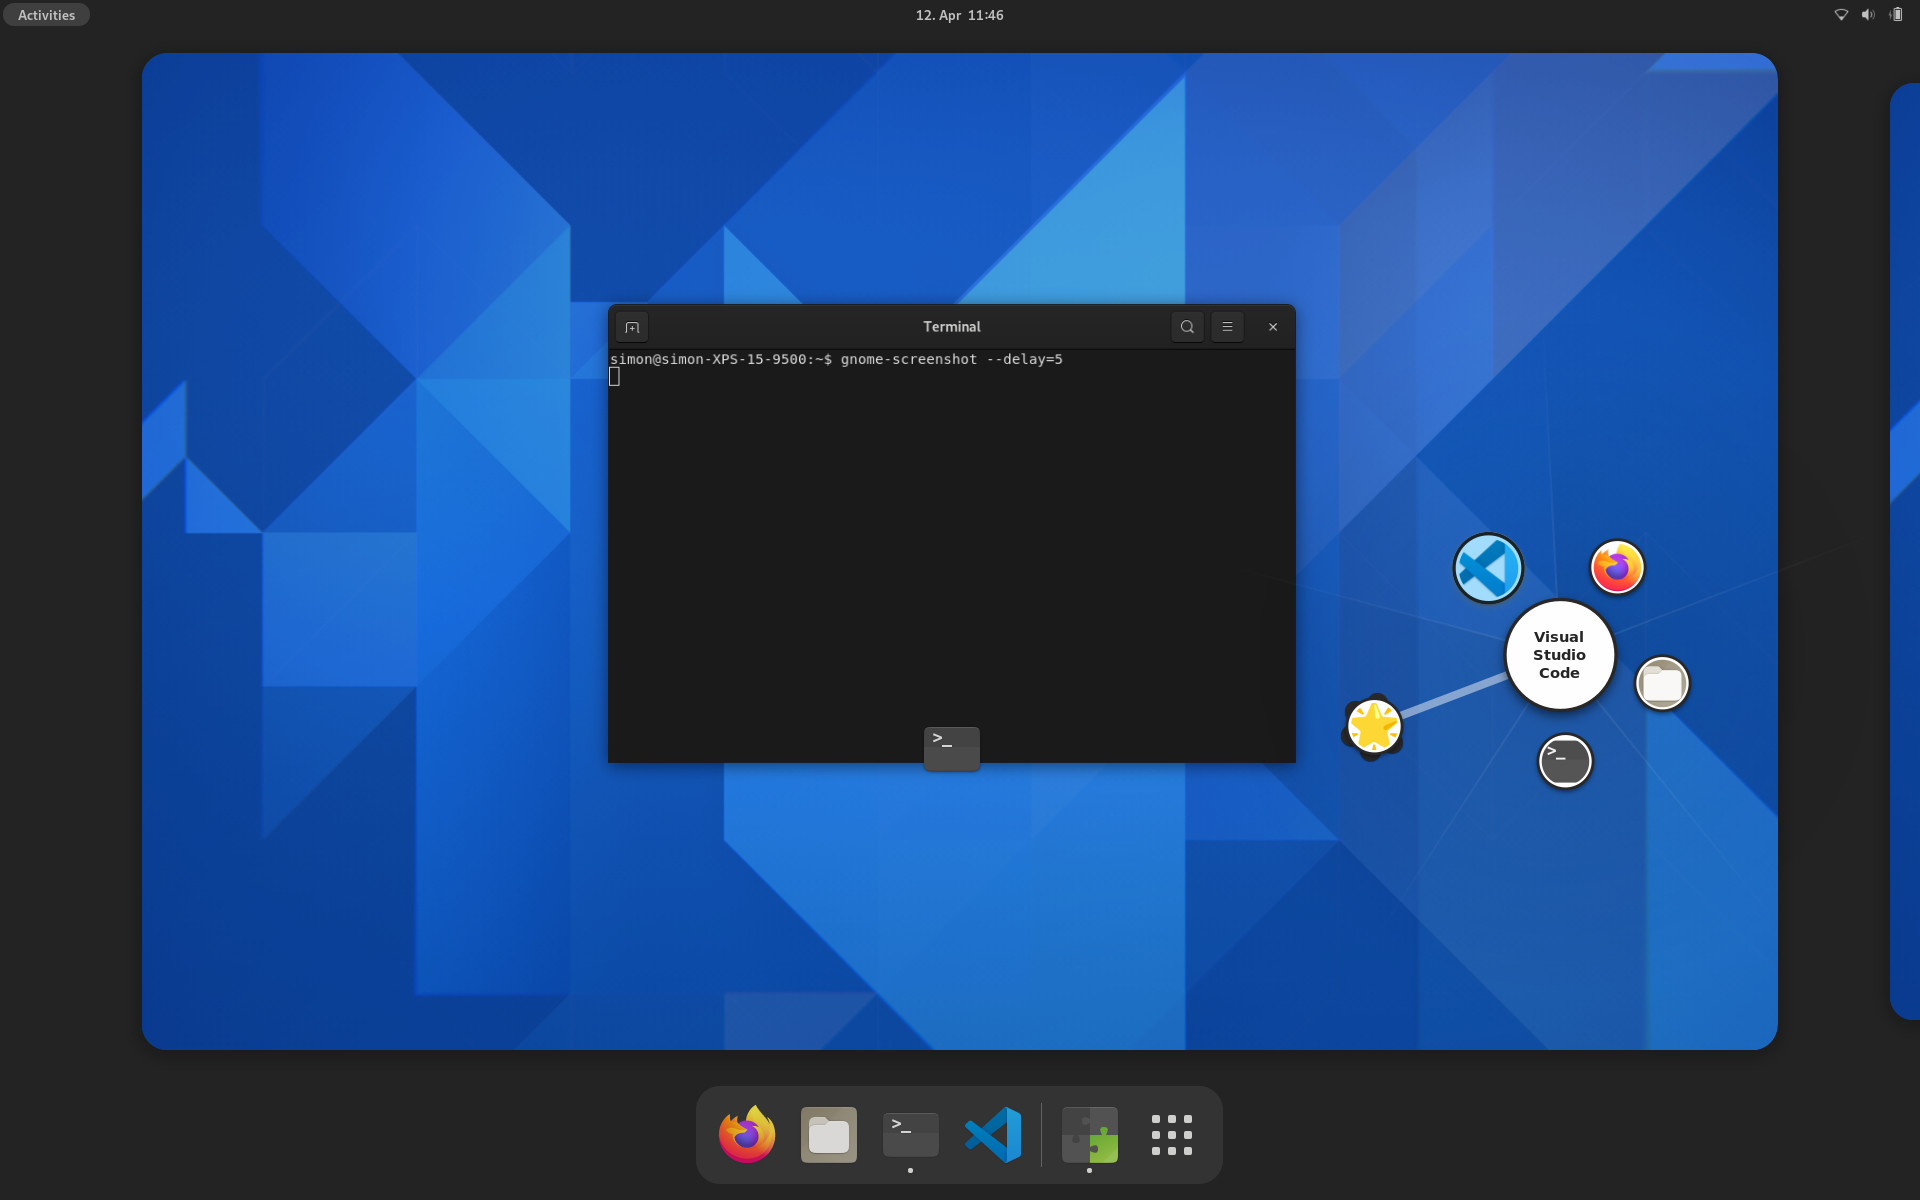 Fly-Pie running on GNOME 40.